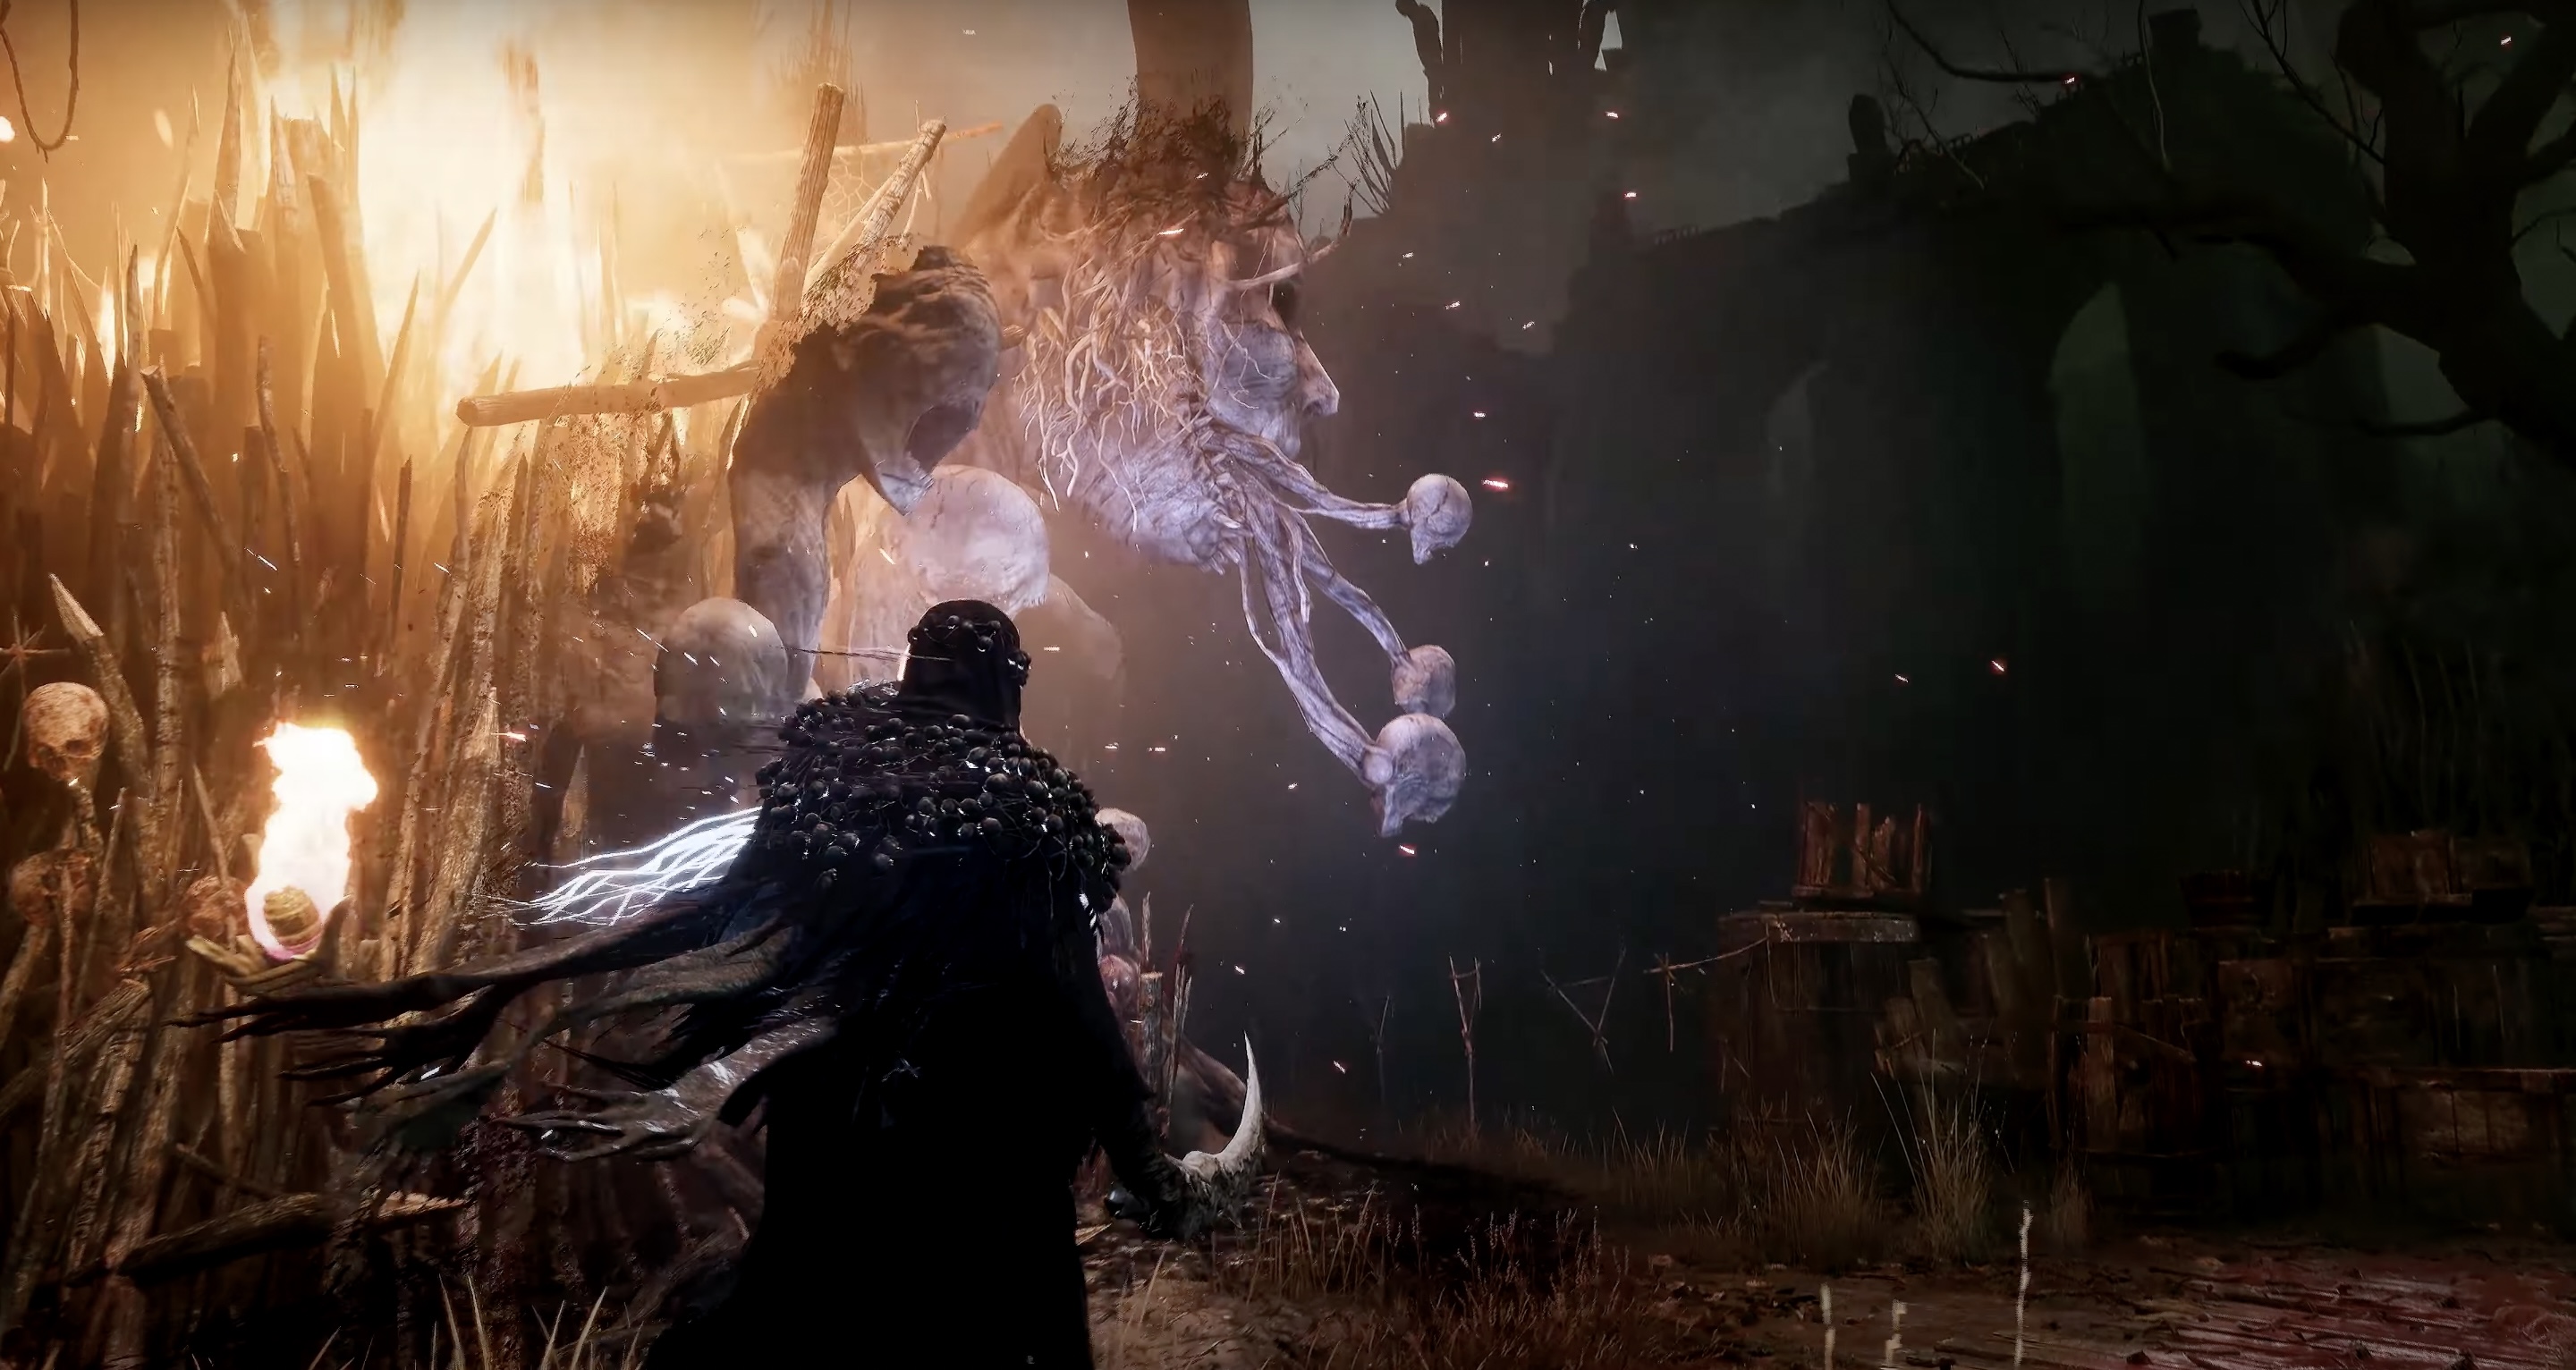 The Lords Of The Fallen Gameplay Reveal Trailer